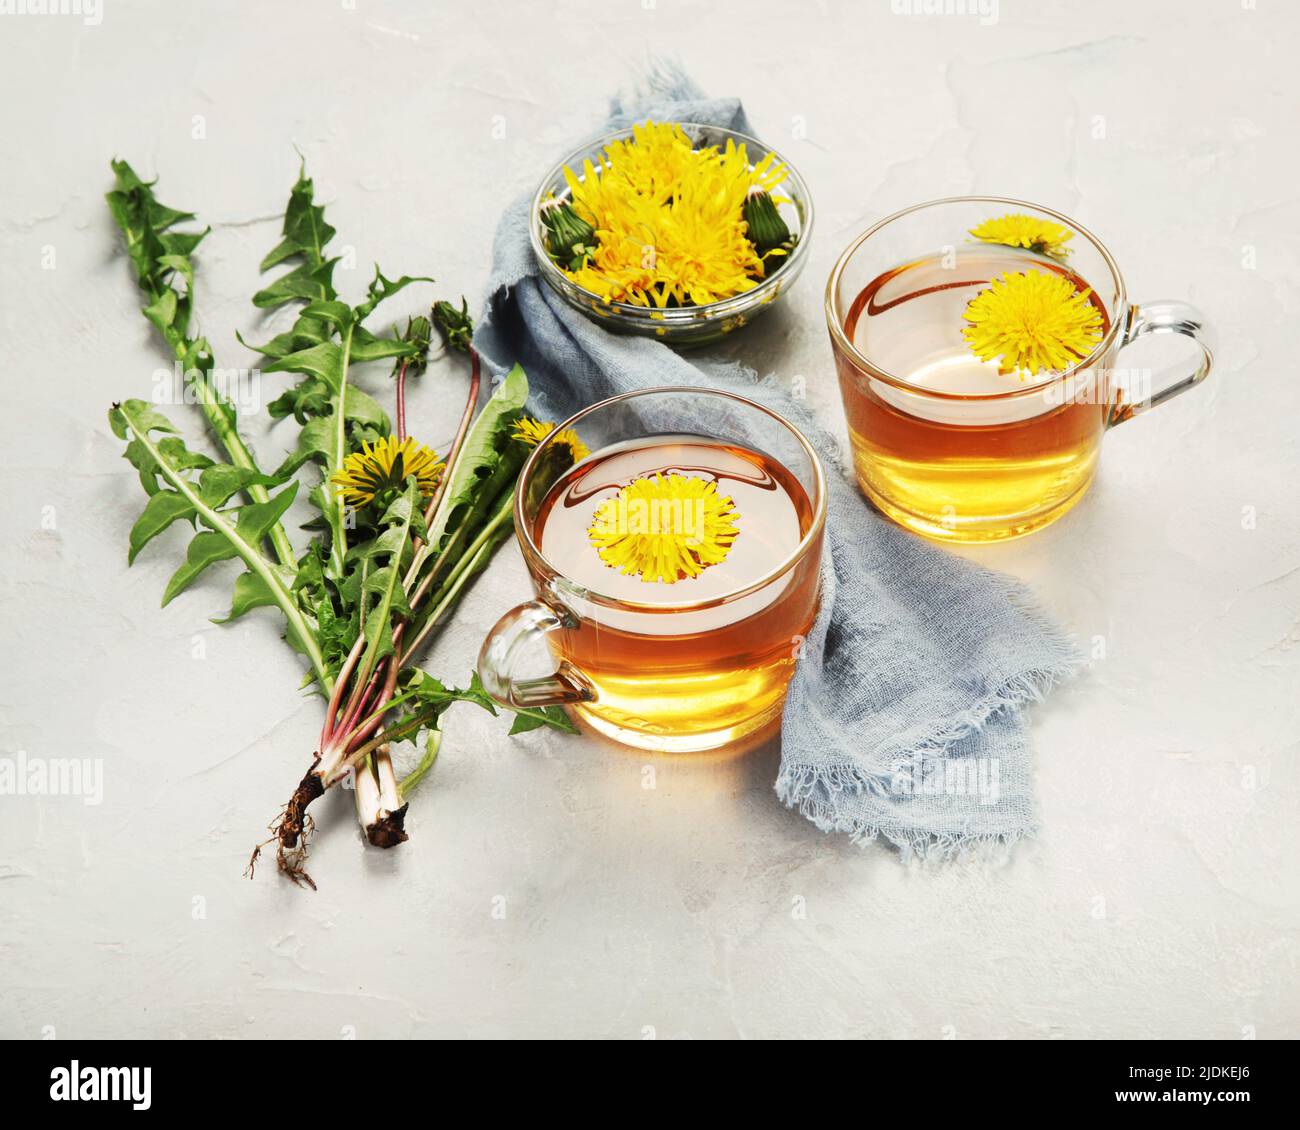 Delicious healthy tea made of dandelion flowers. Fragrant fresh herbs. Stock Photo